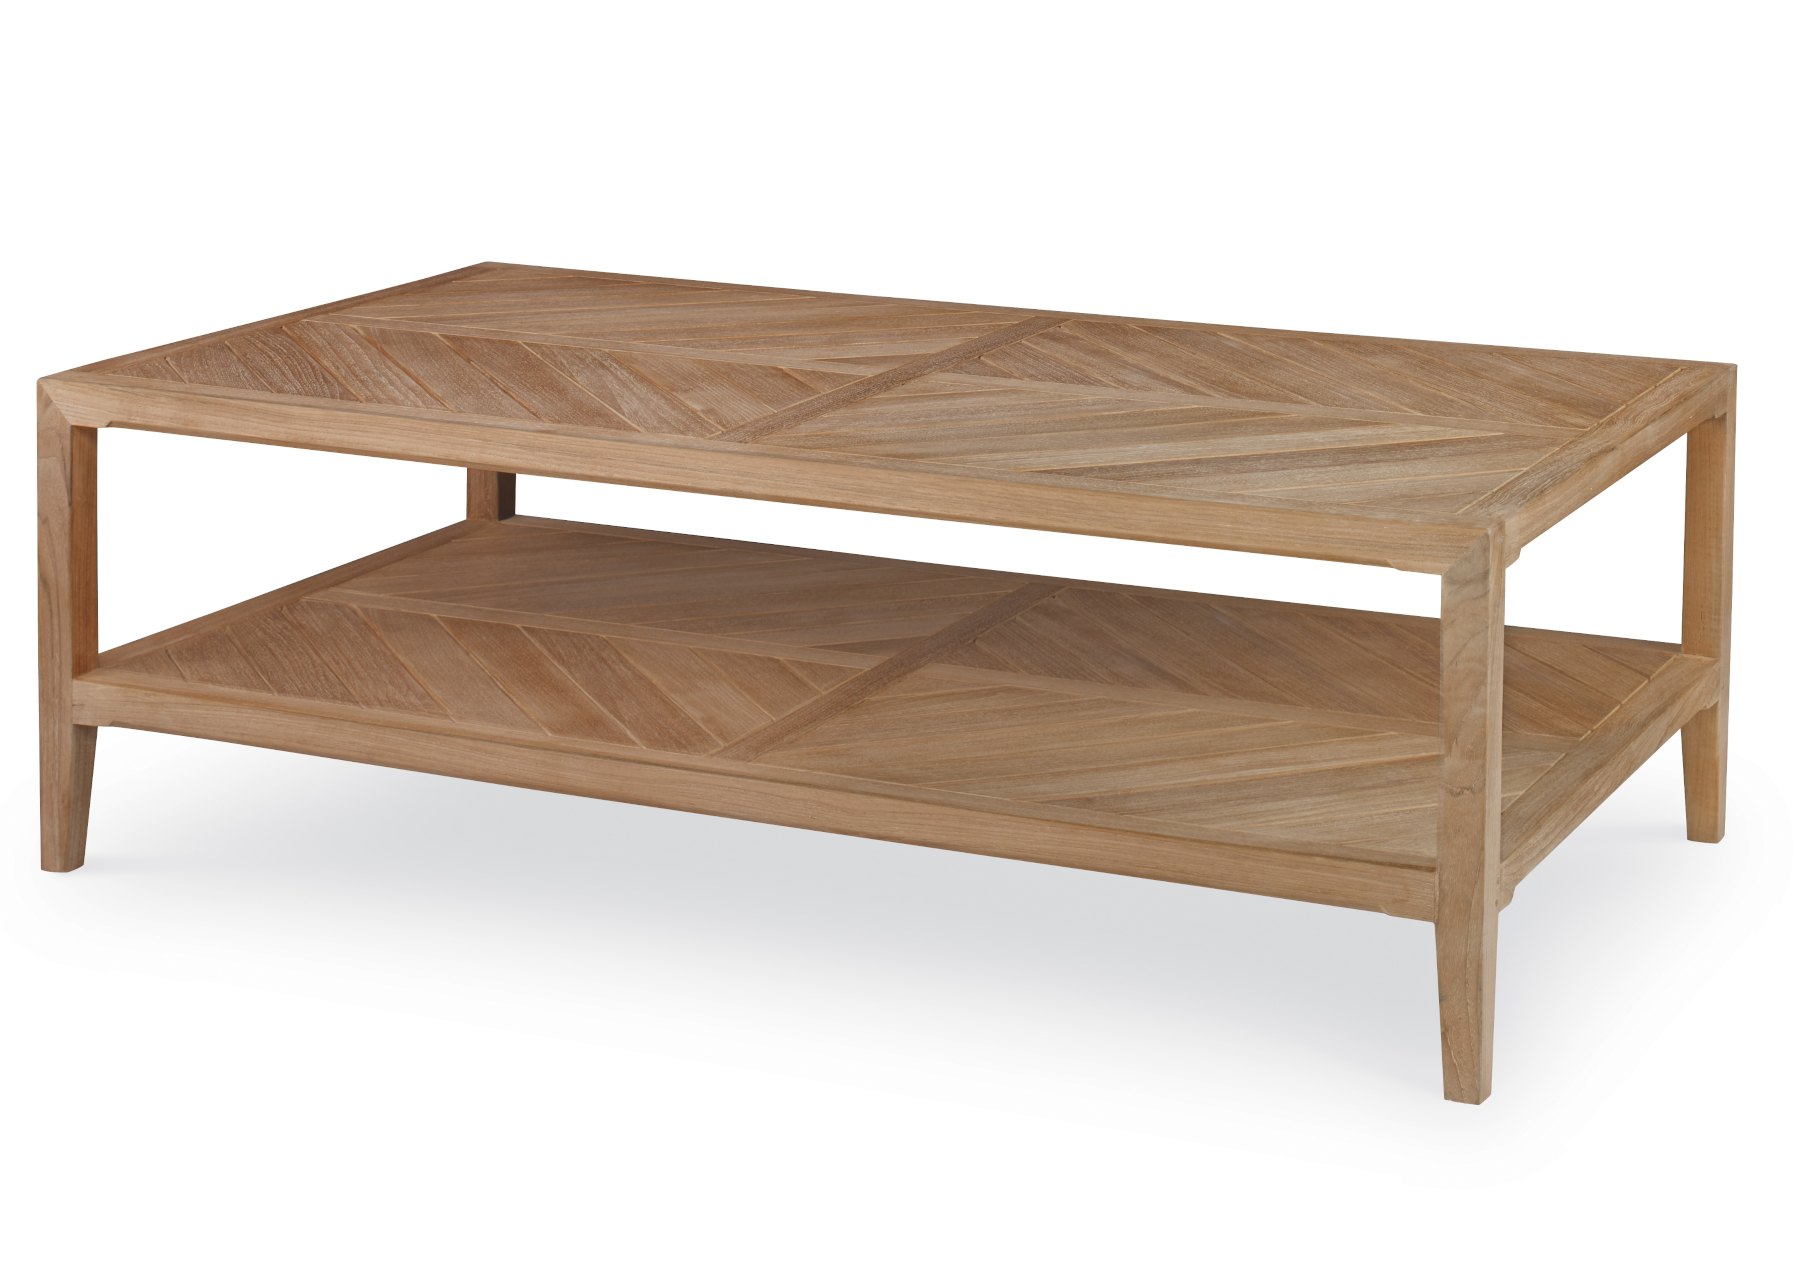 ALPINE RECTANGLE COCKTAIL TABLE